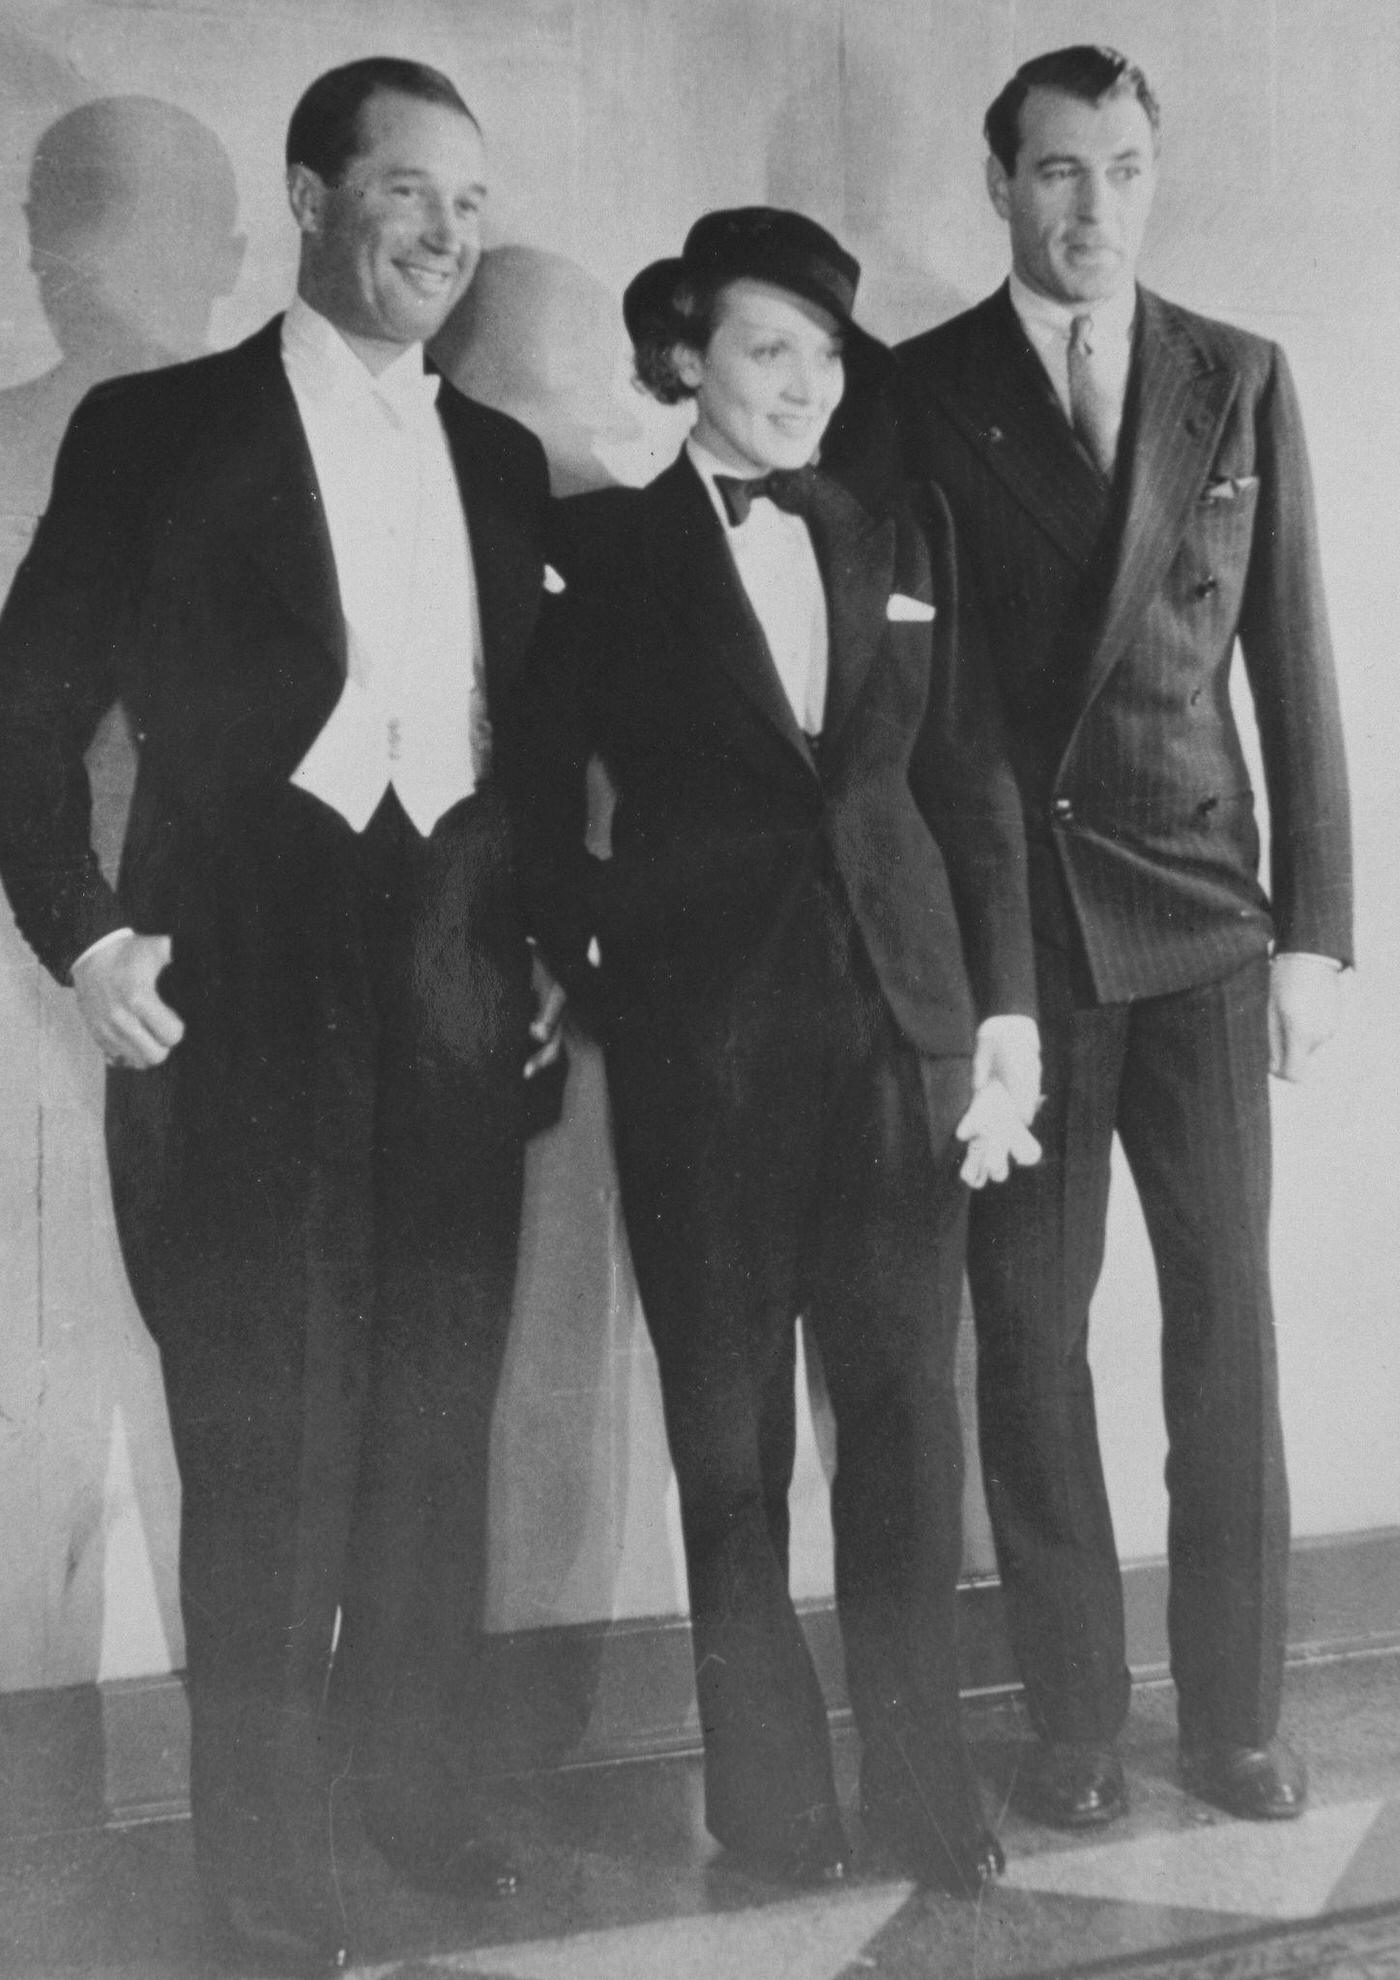 Maurice Chevalier (left) and Gary Cooper flank Marlene Dietrich dressed in a tuxedo.